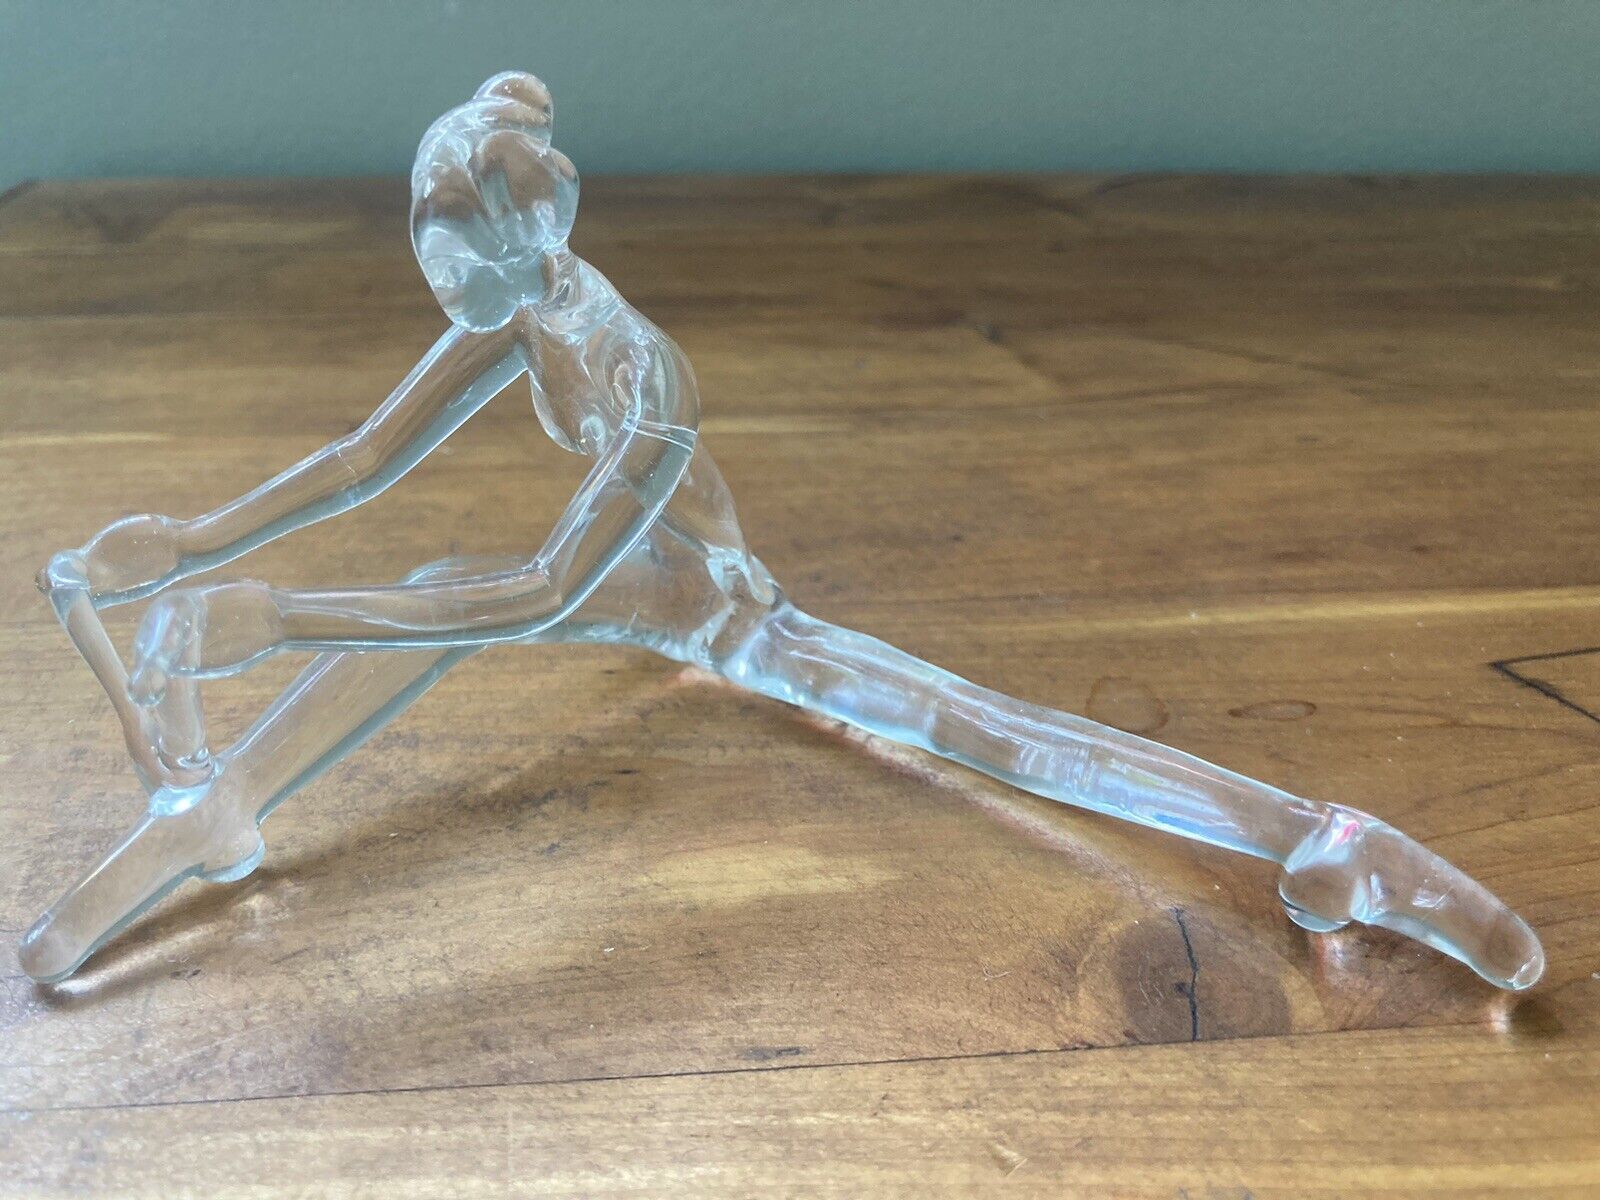 Crystal Ballerina Tying Shoes Signed by Artist 1987 Milon Townsend